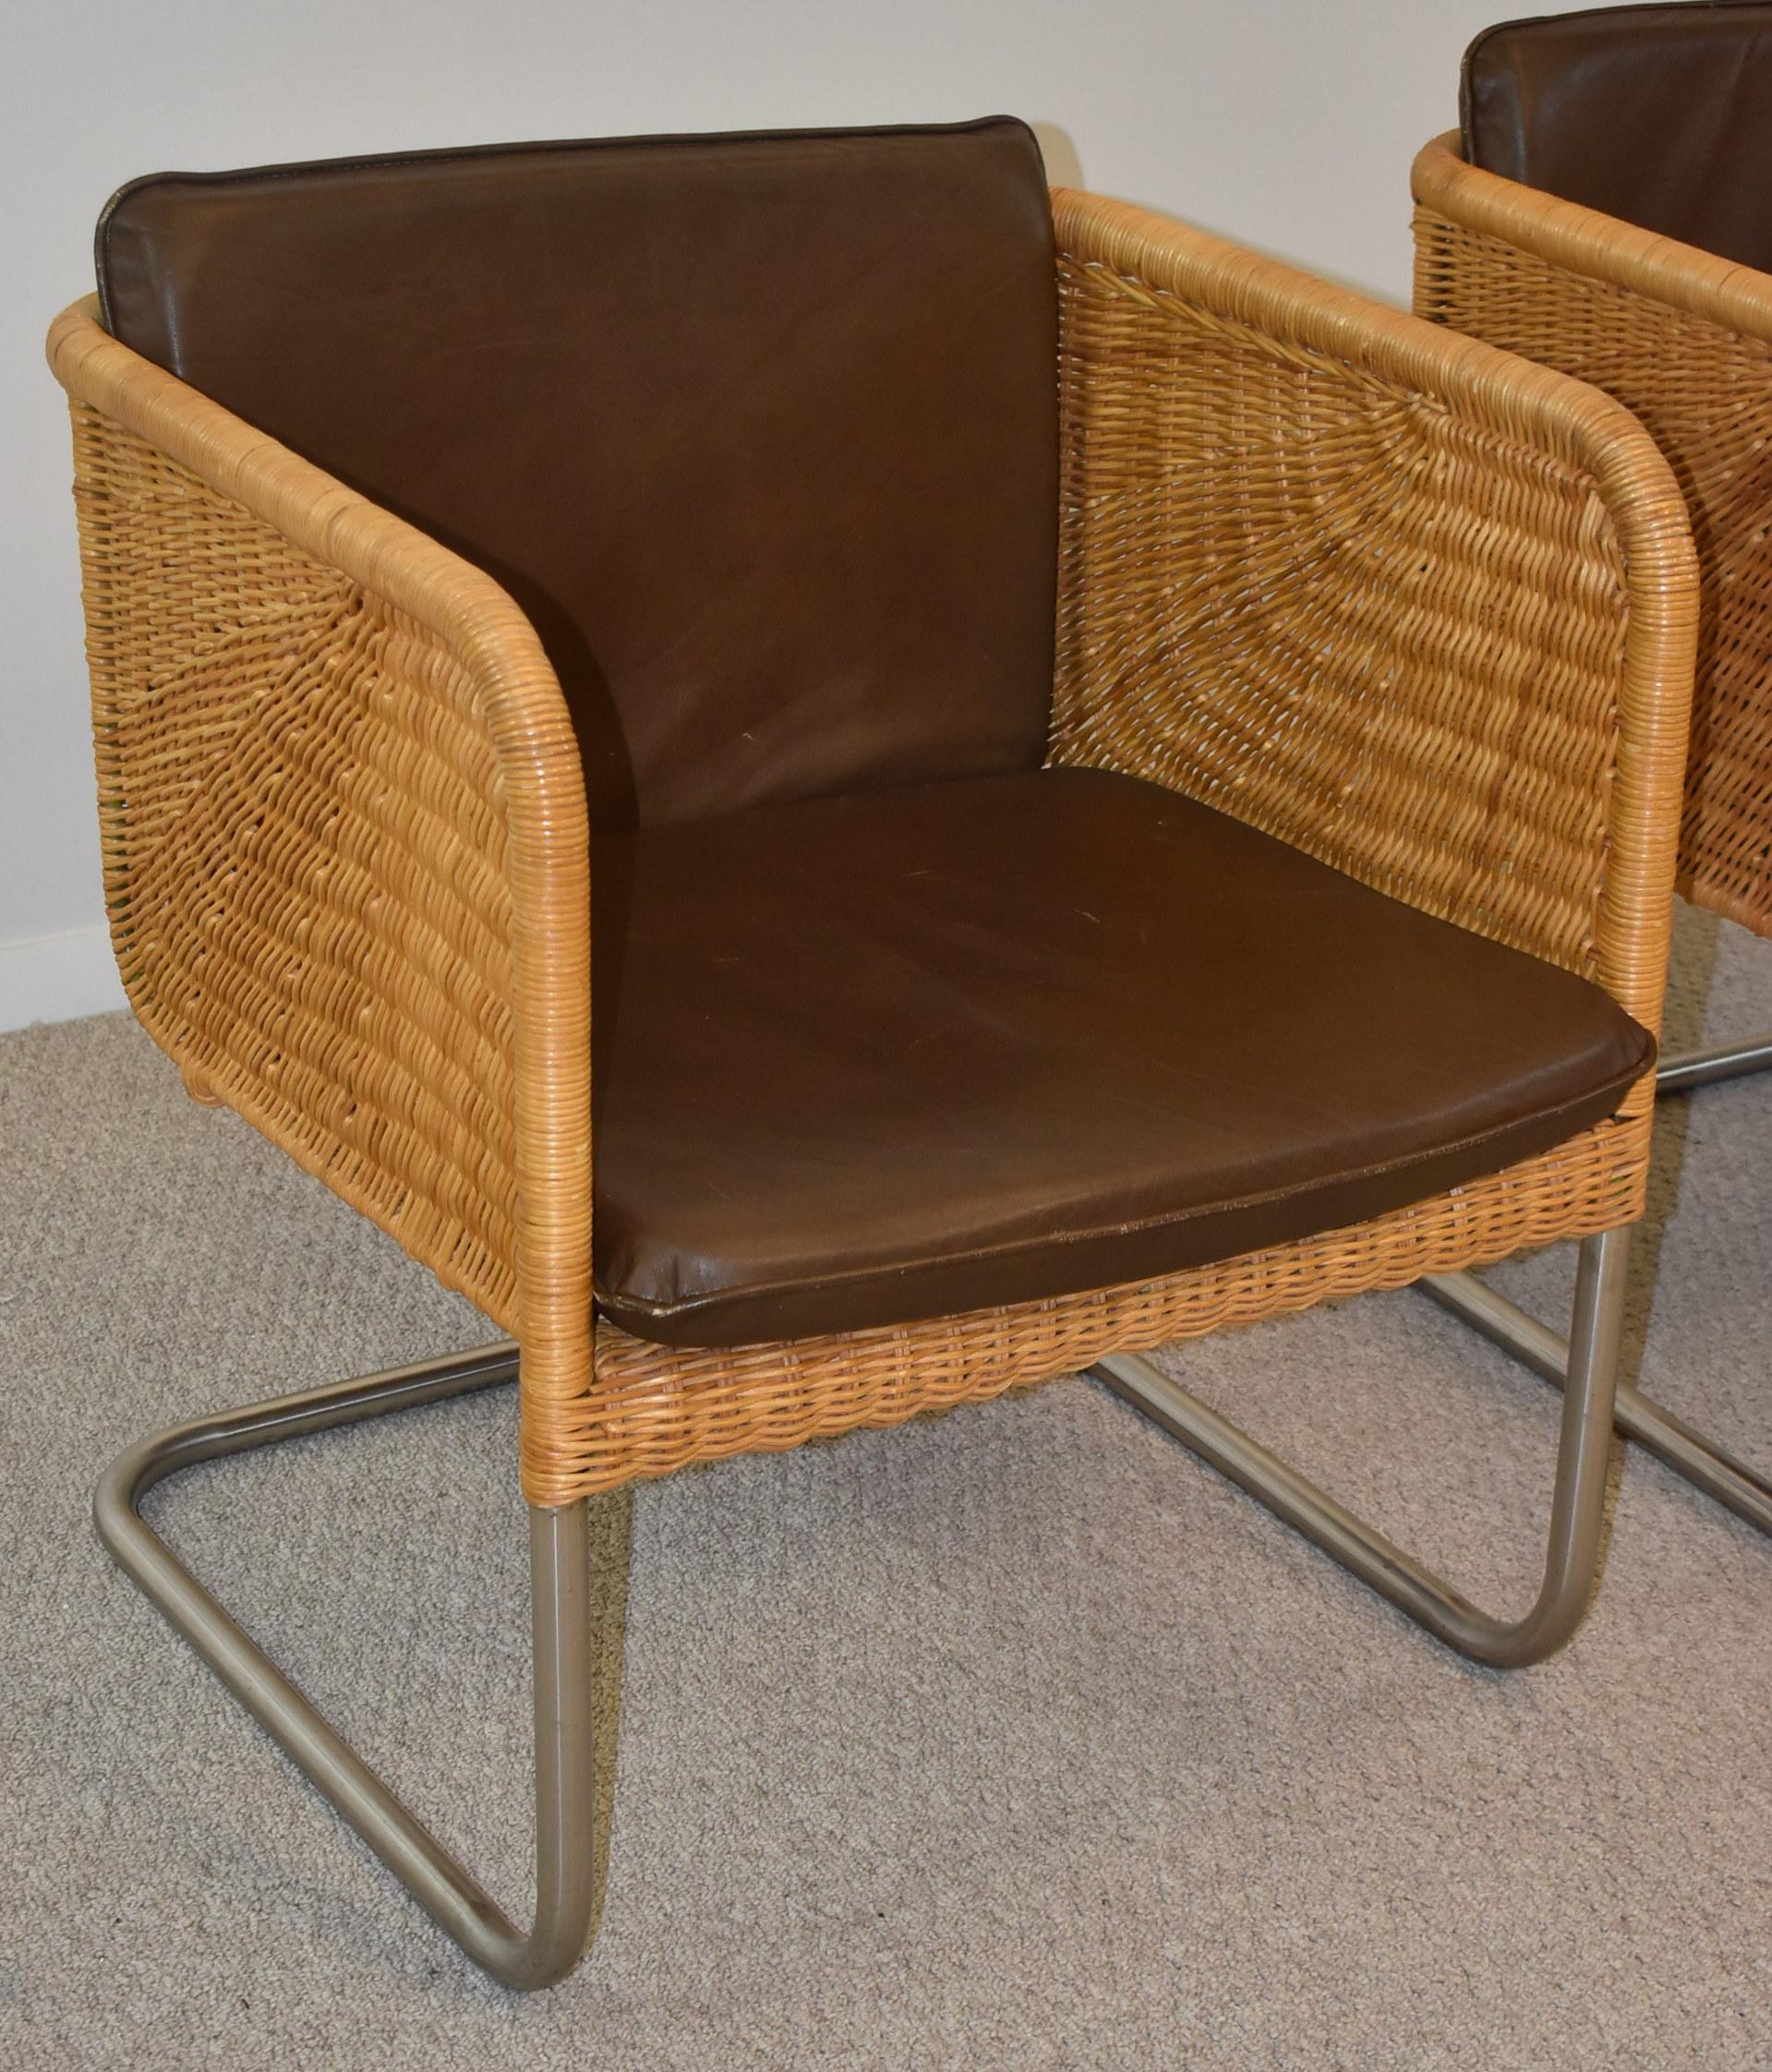 Vintage pair Harvey Probber wicker, tubular chrome and leather side chairs D43 Model. Removable brown leather cushions, and chrome is in fantastic condition unpitted, untarnished. Cantilever design. These chairs are in excellent. Measures: 24